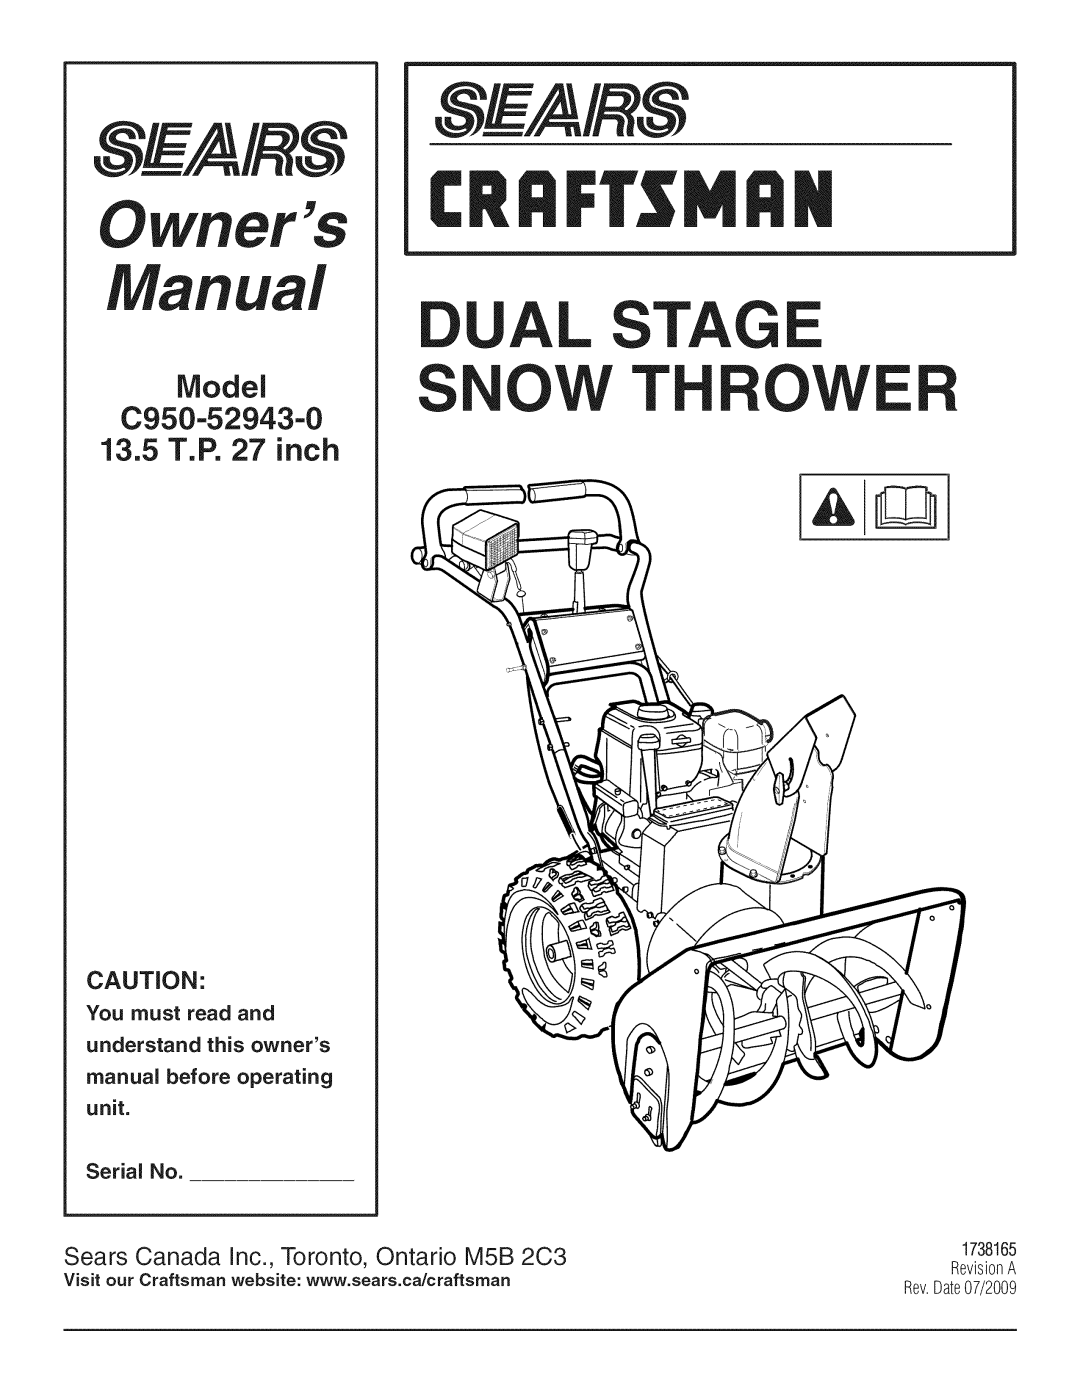 Craftsman C950-52943-0 owner manual Al Stage, IVlodelS OW T ROW, 13.5T.P. 27 inch, unit, Serial No 